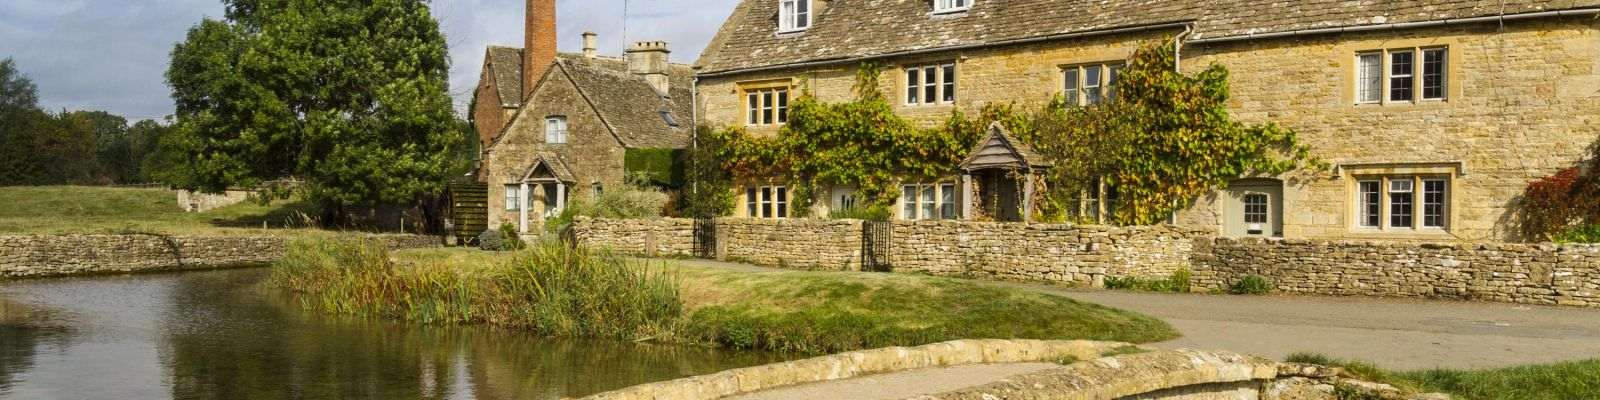 Holiday Cottages In Gloucestershire To Rent Self Catering